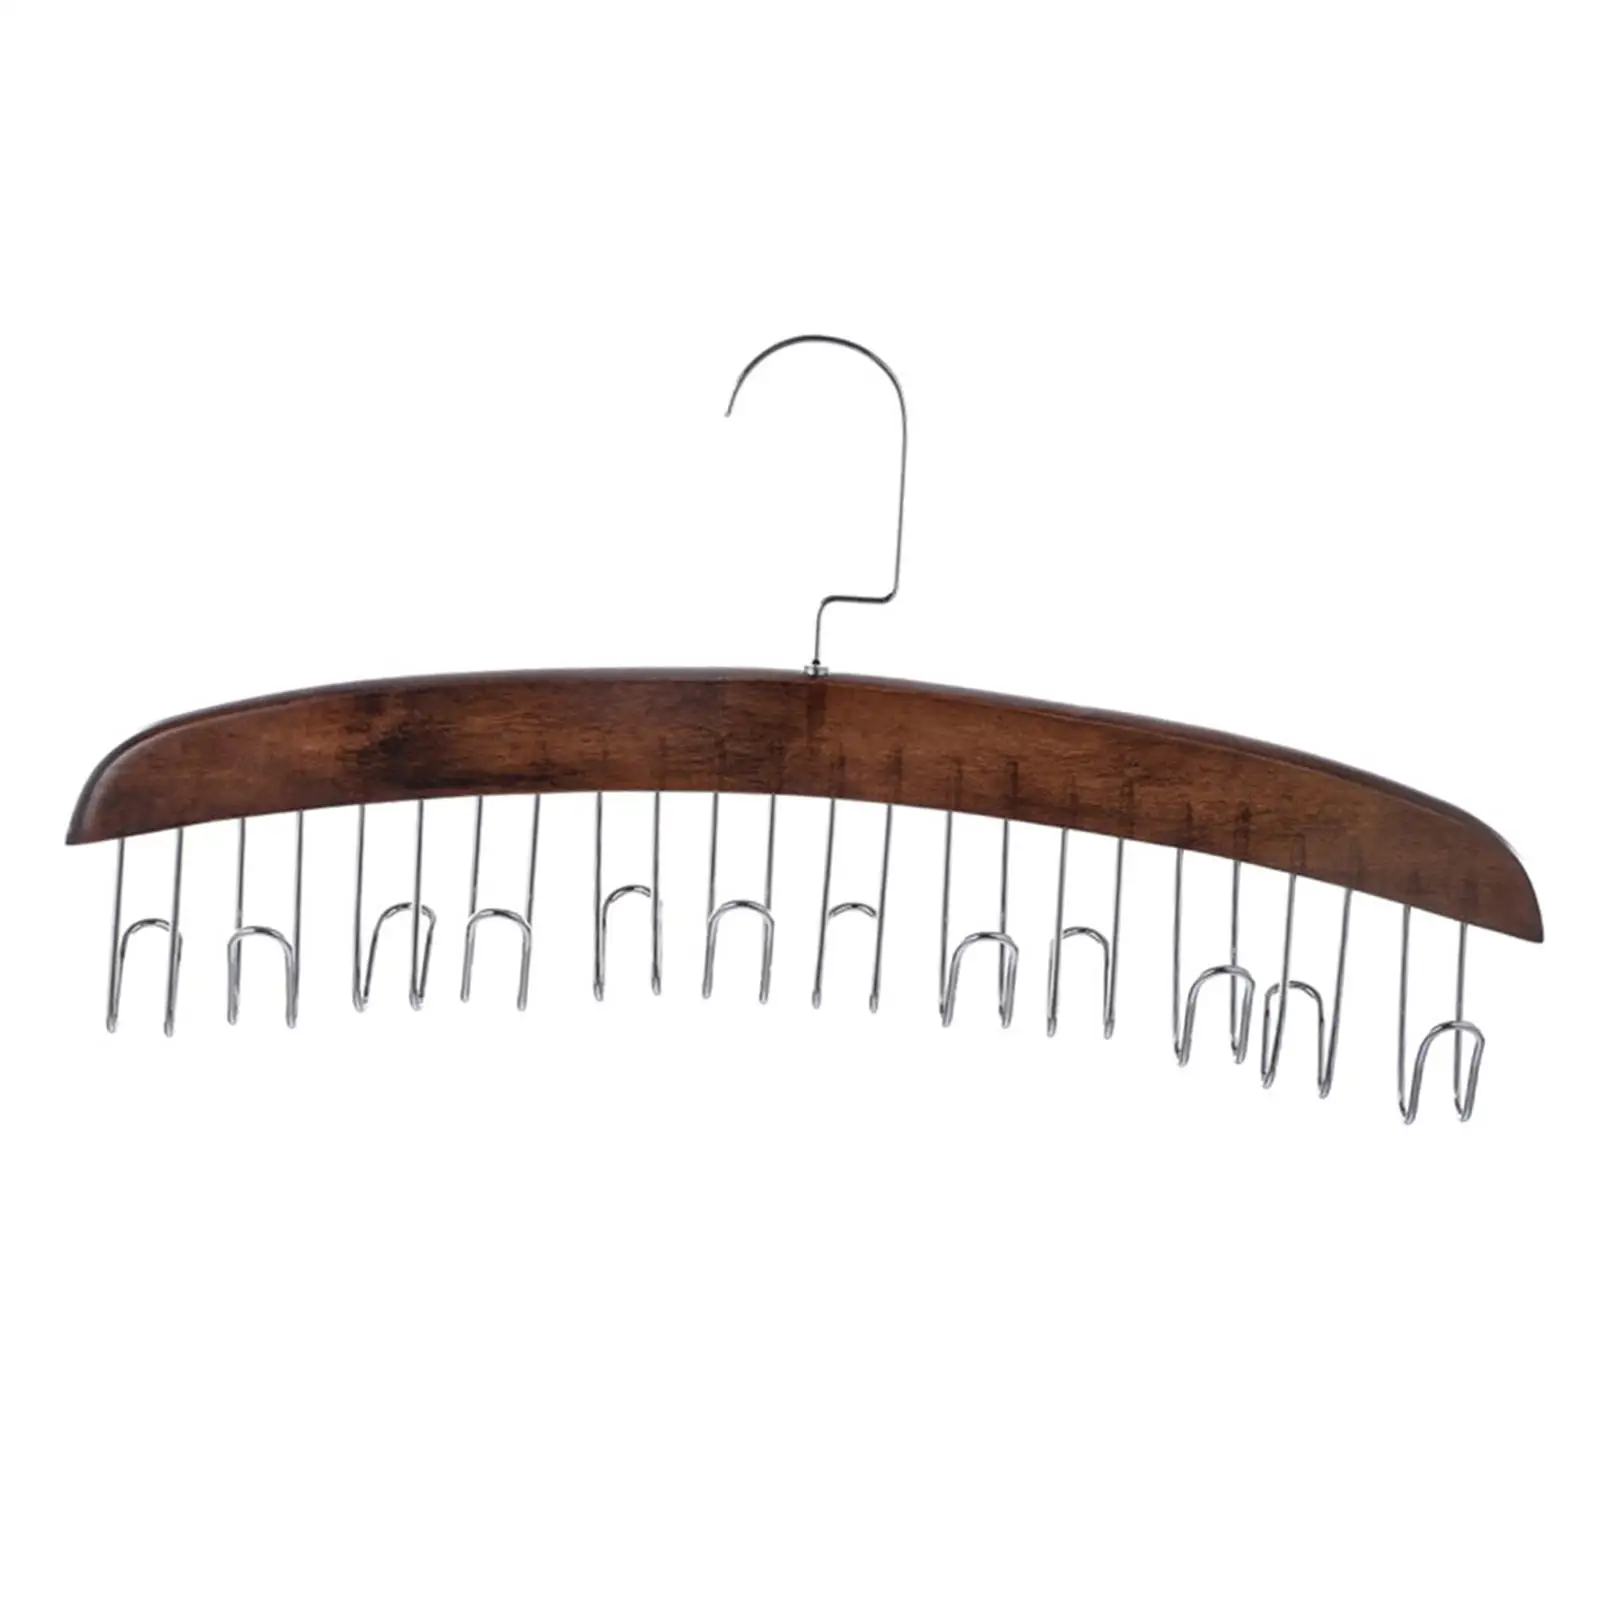 Wooden Tie Hanger Shawl Towel Holder Closet Organizers Hanging Holder Belt Hanger for Bow Ties Scarves Jewelry Bags Tank Tops